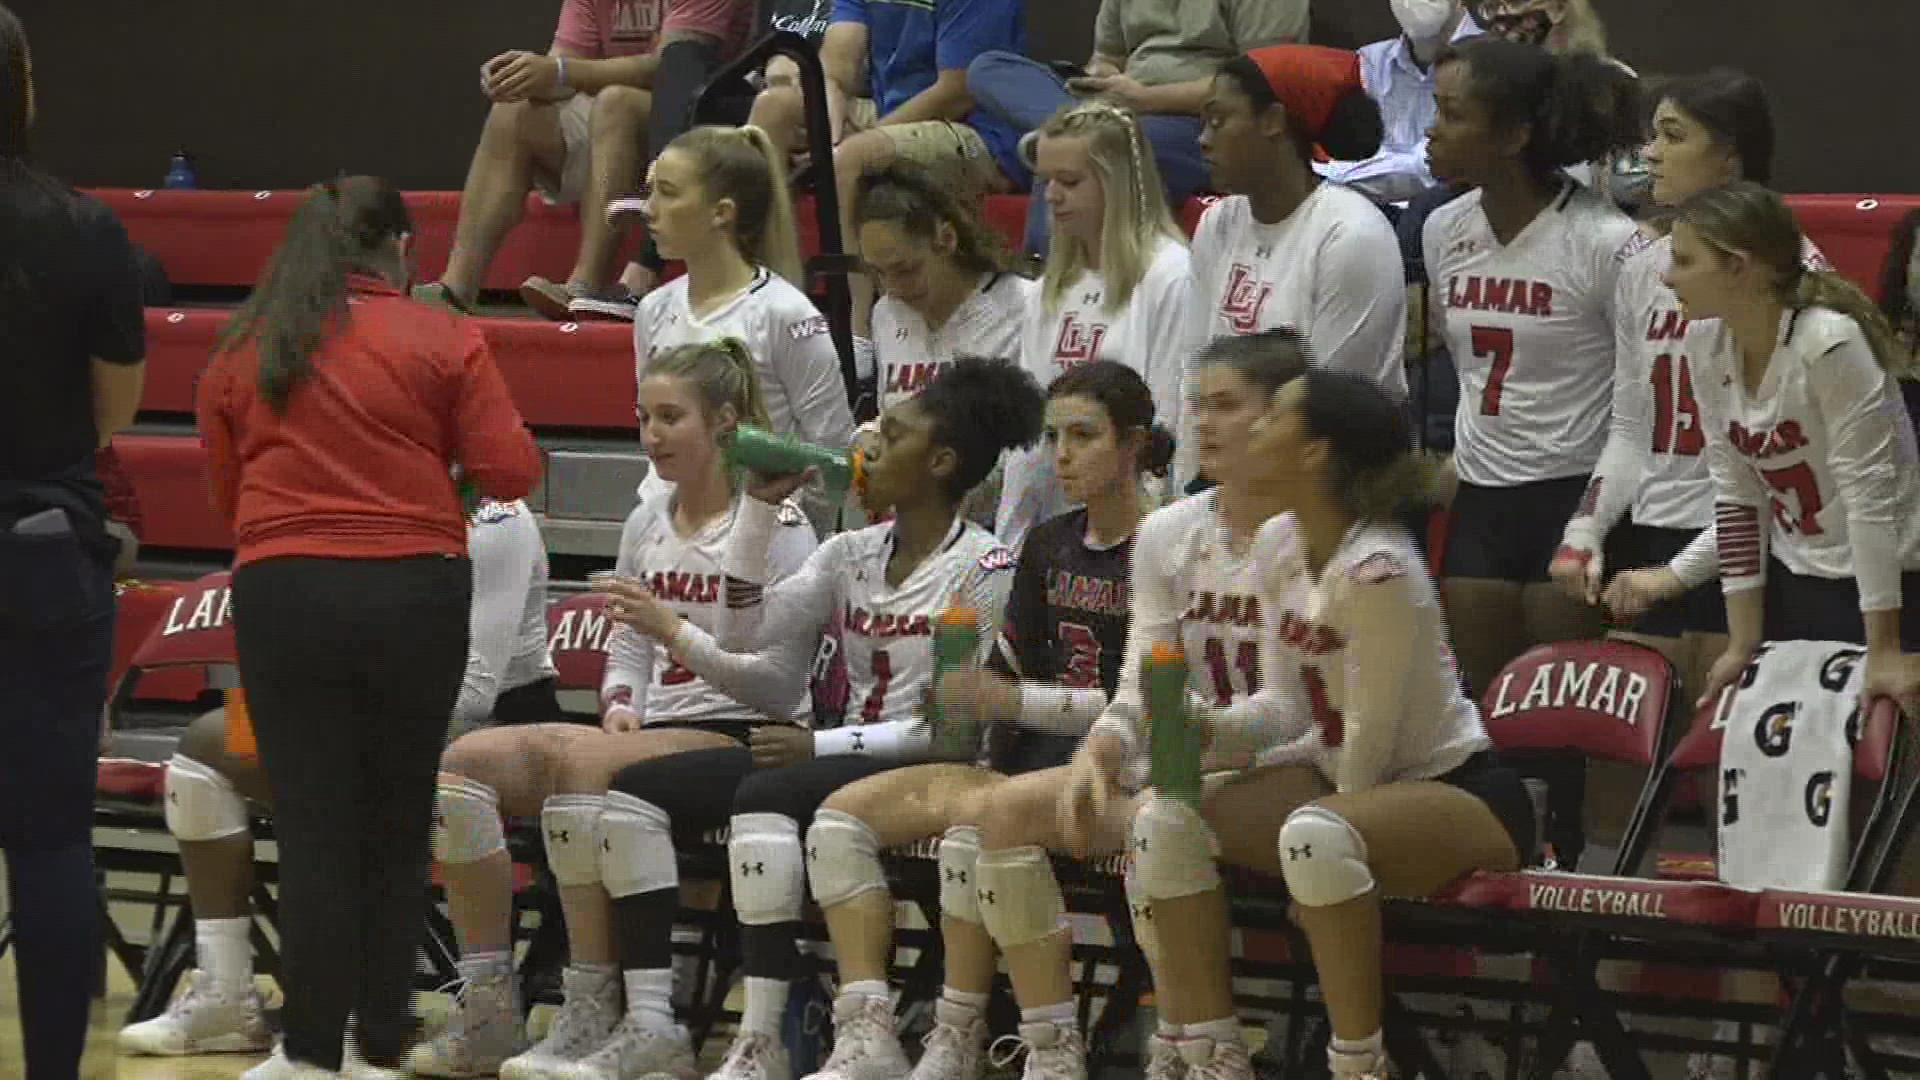 Lamar volleyball will open the season at home on August 26 against Idaho State